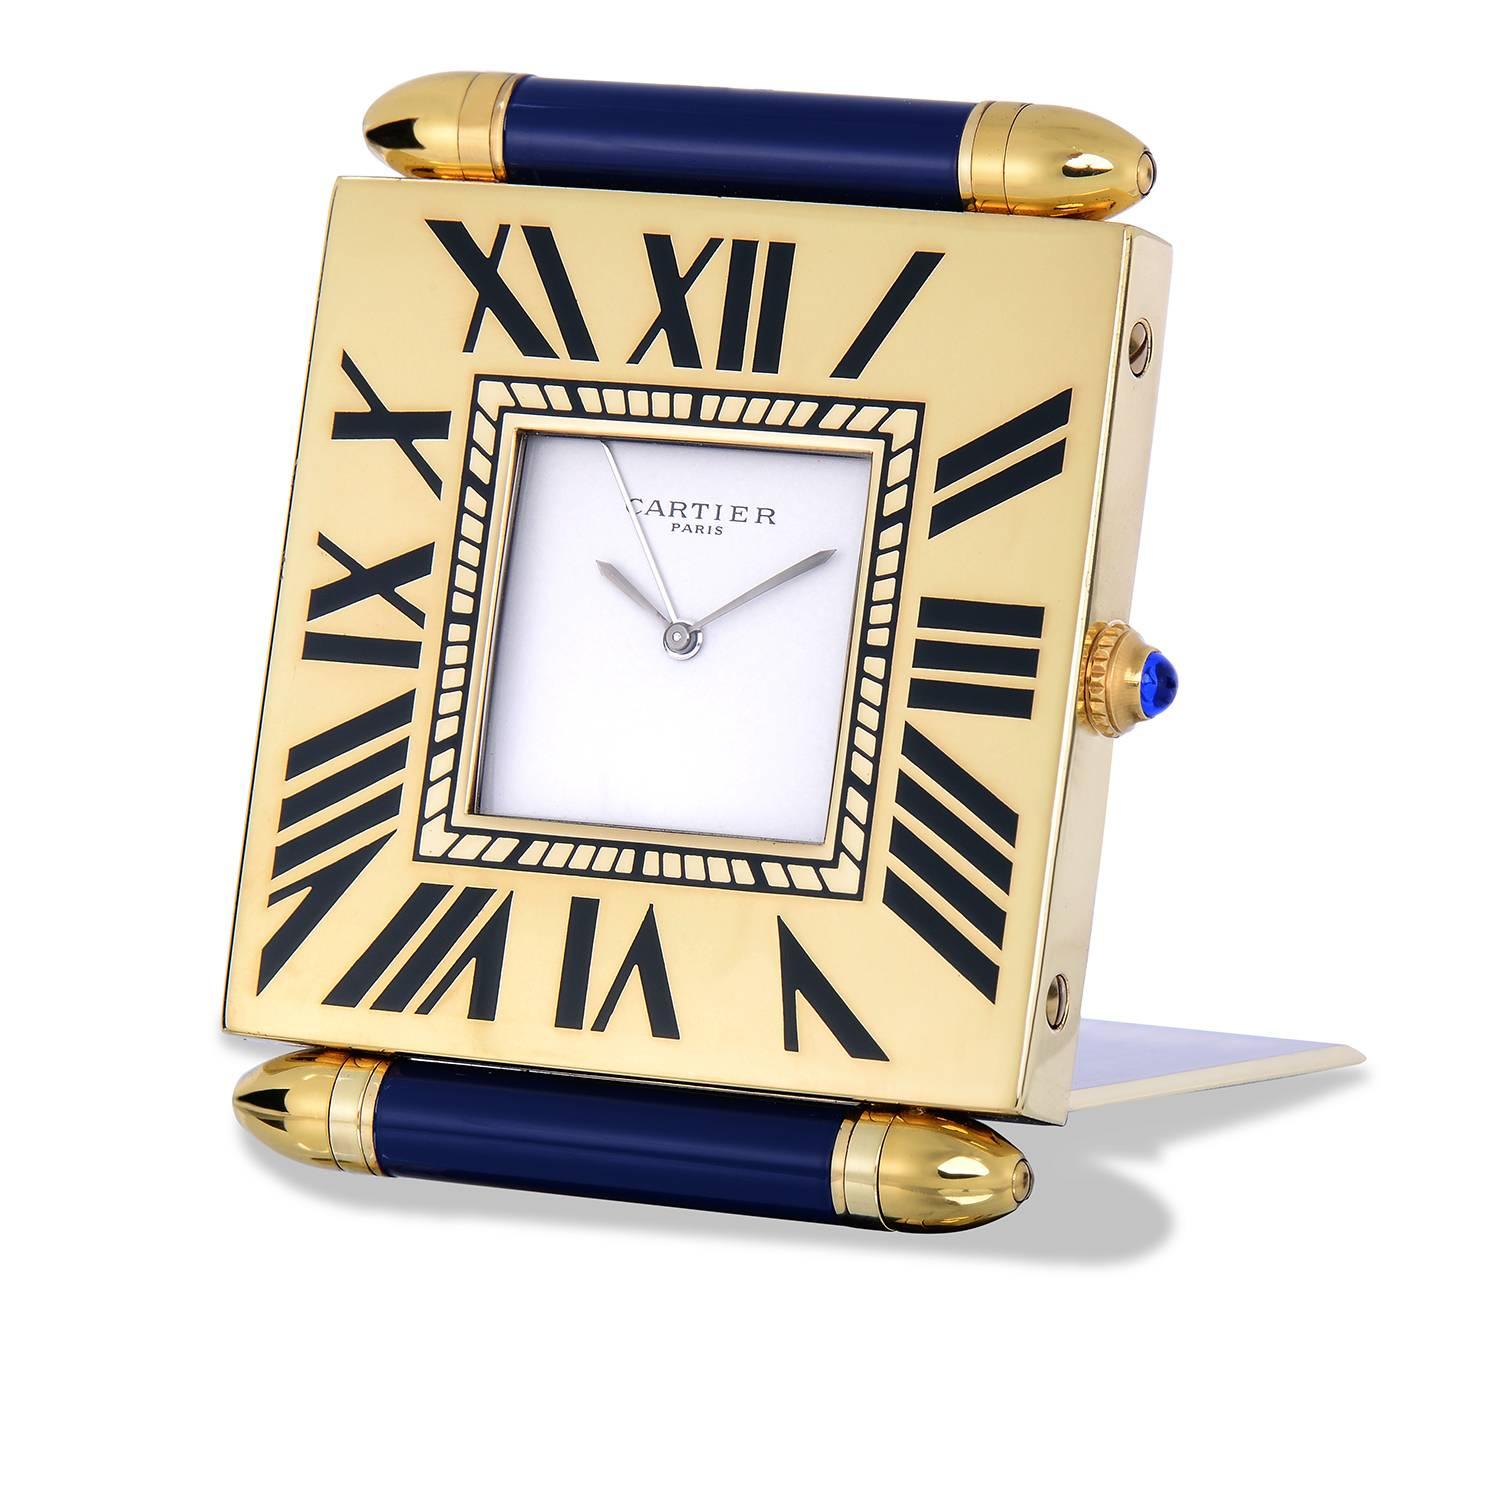 Cartier Paris Travel Alarm Clock
Quartz Movement
Made in France
Gold Plated
Lapis Enamel Decorated Top
Folding Hinged Stand with Bullet Lugs
Roman Numeral Markers
Cartier Paris Dial and Signed Case-Back
Overall Good Condition with Some Wear